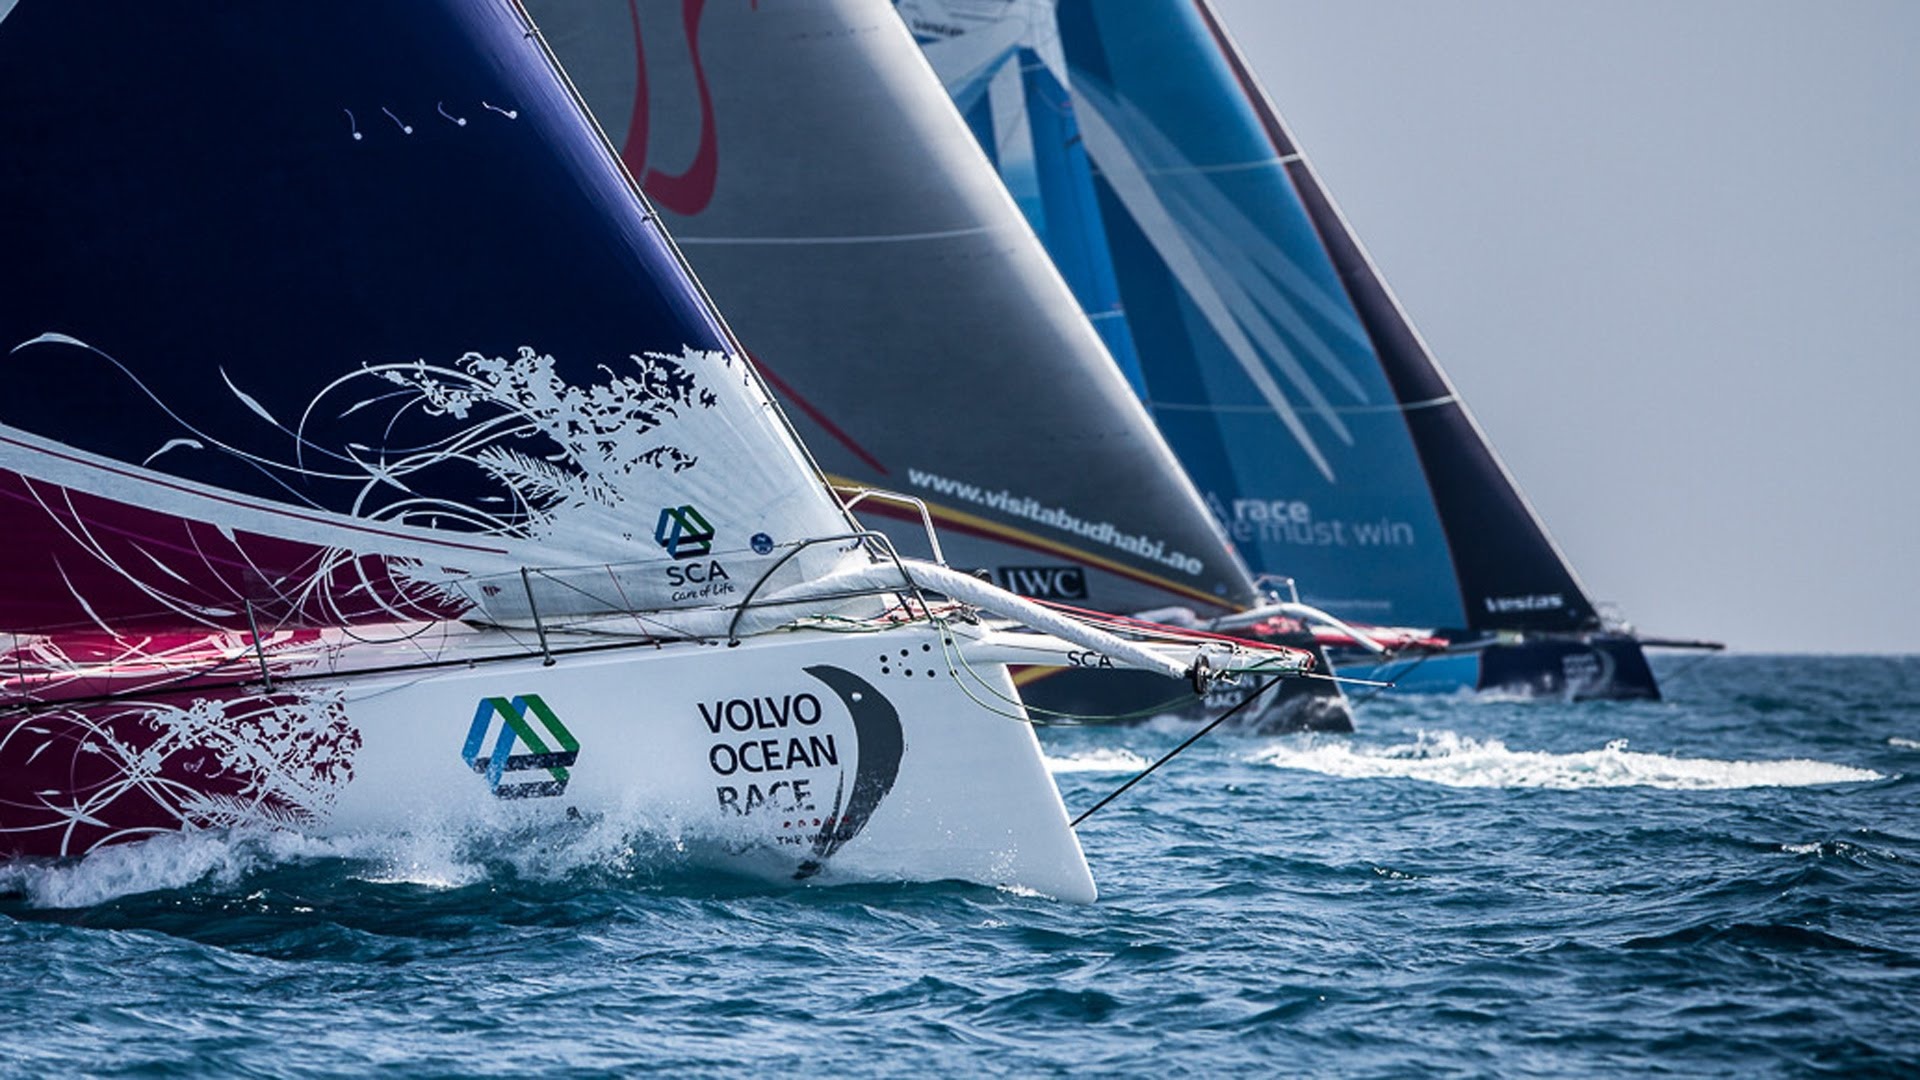 Yacht Racing: Volvo Ocean Race, Water competition tournament, Sailboats competition. 1920x1080 Full HD Wallpaper.